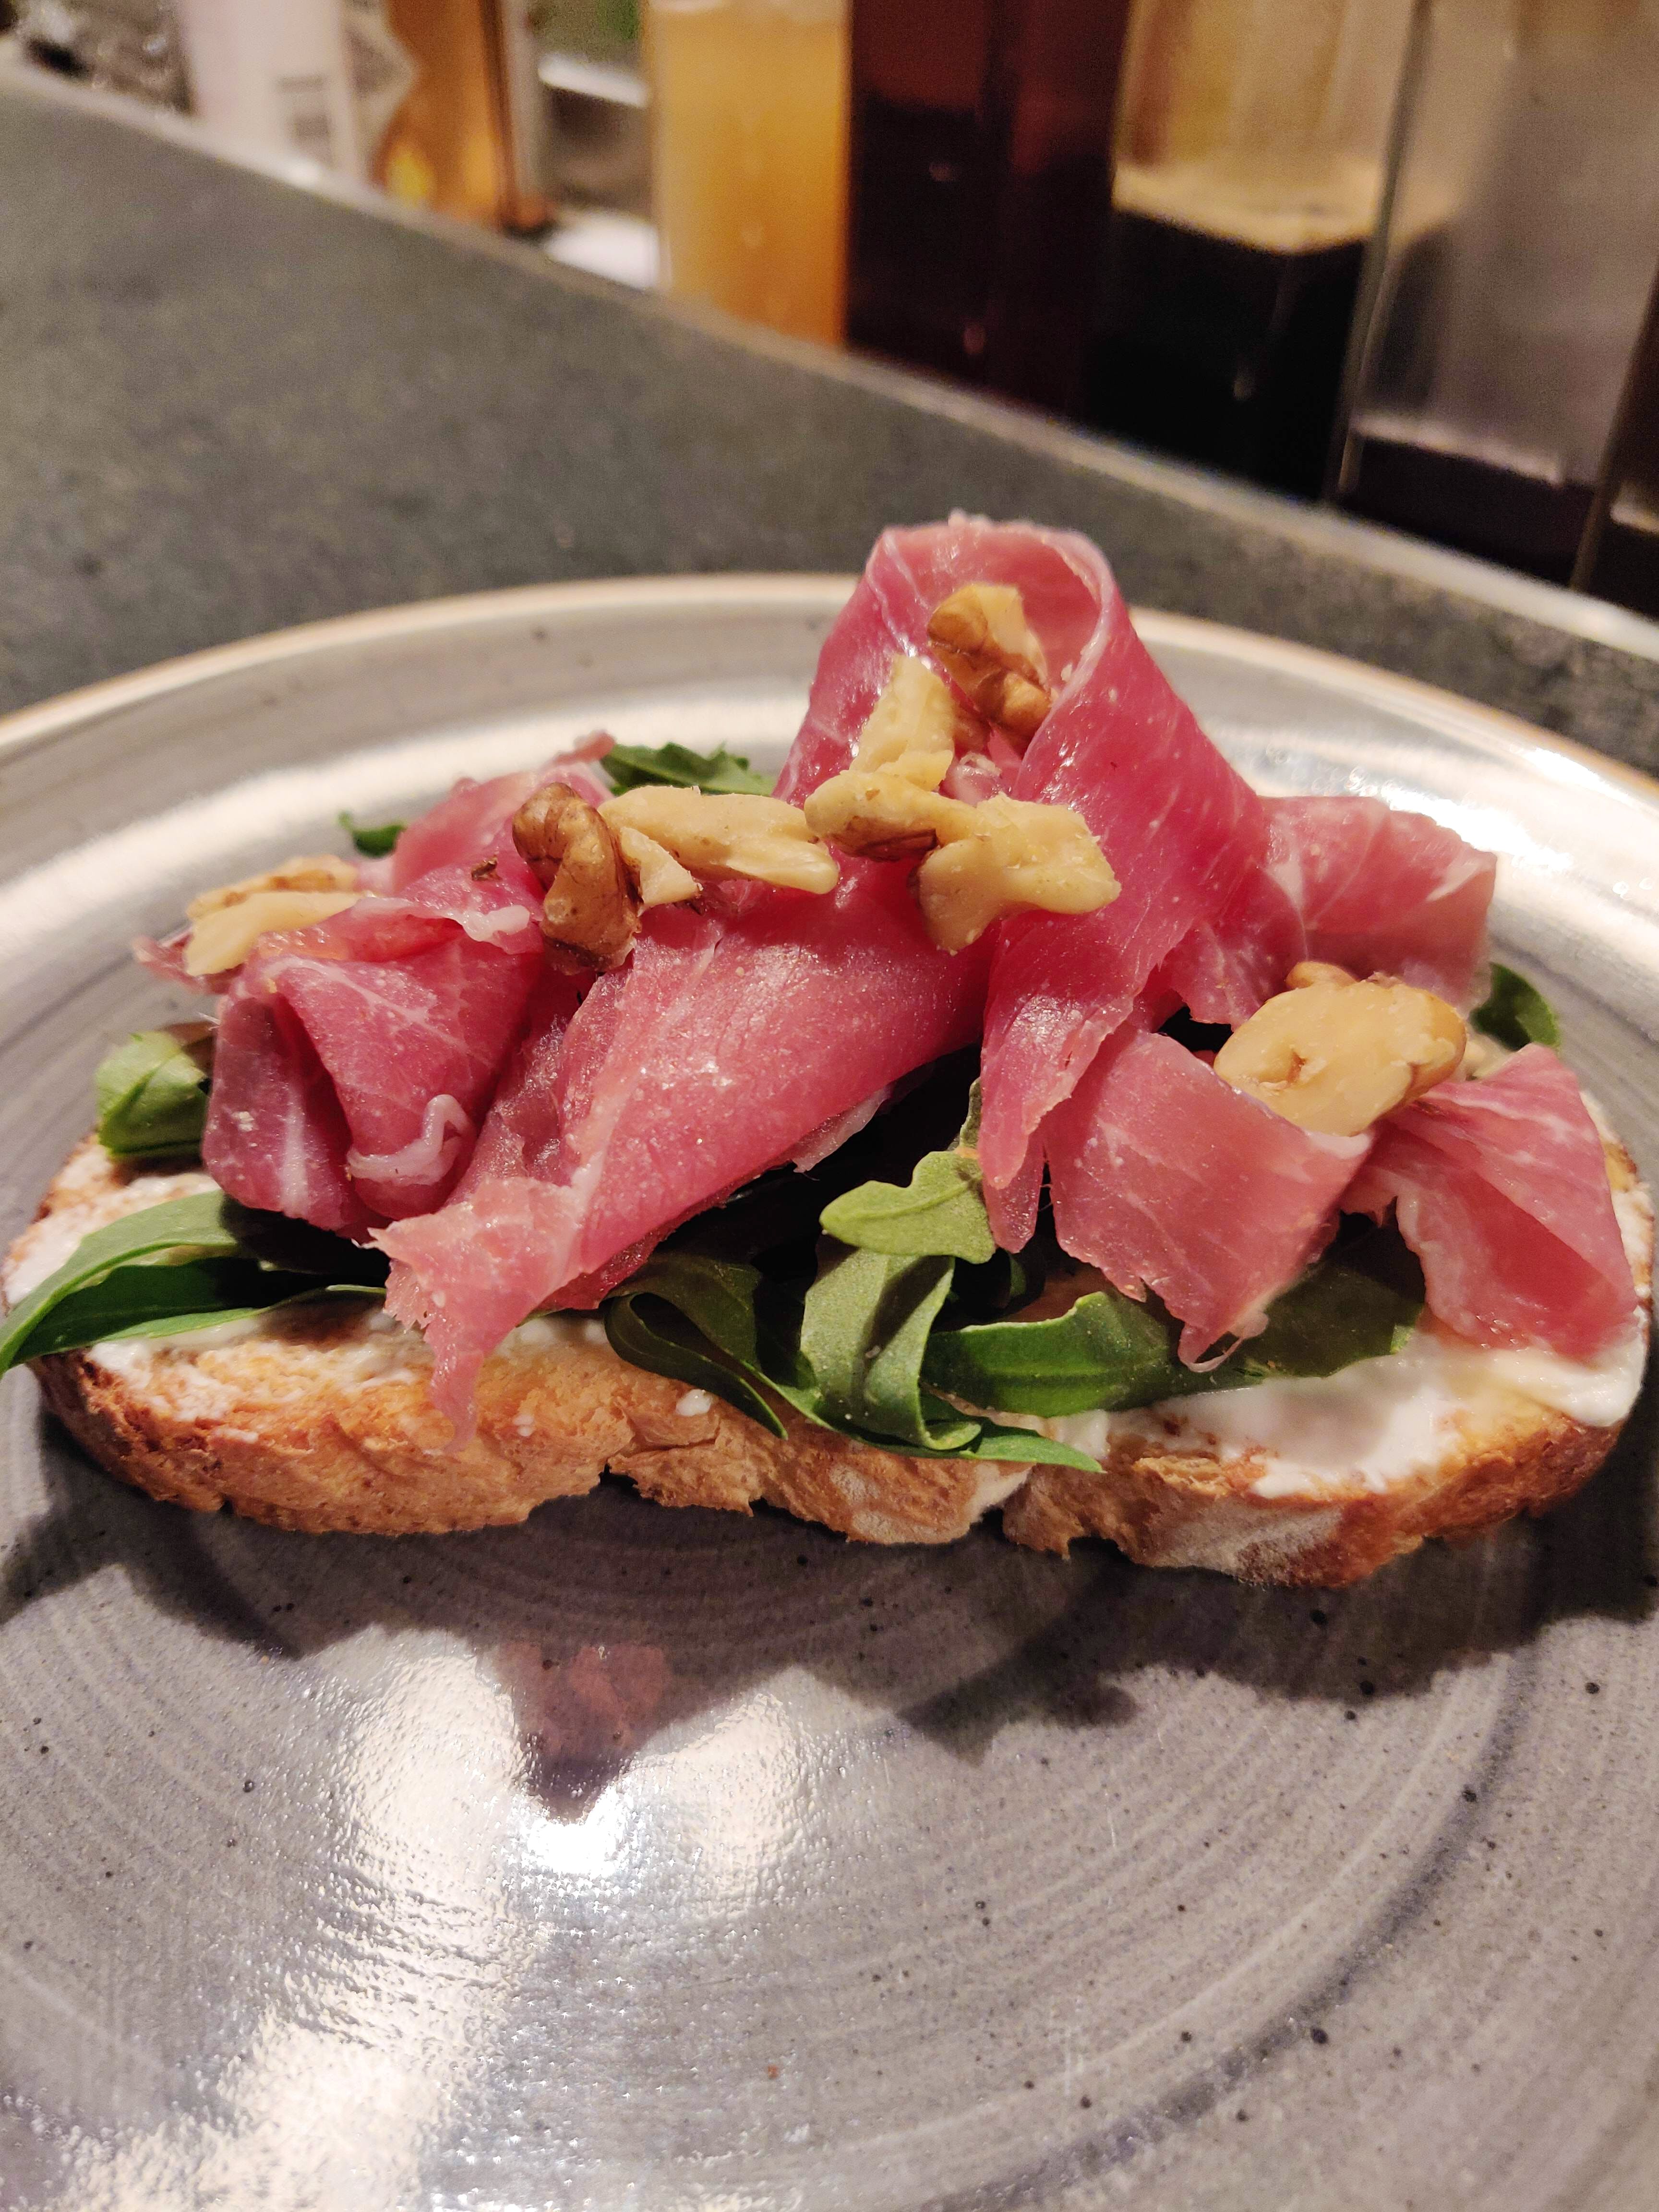 Dish,Food,Cuisine,Ingredient,Pastrami,Meat,Produce,Prosciutto,Staple food,appetizer